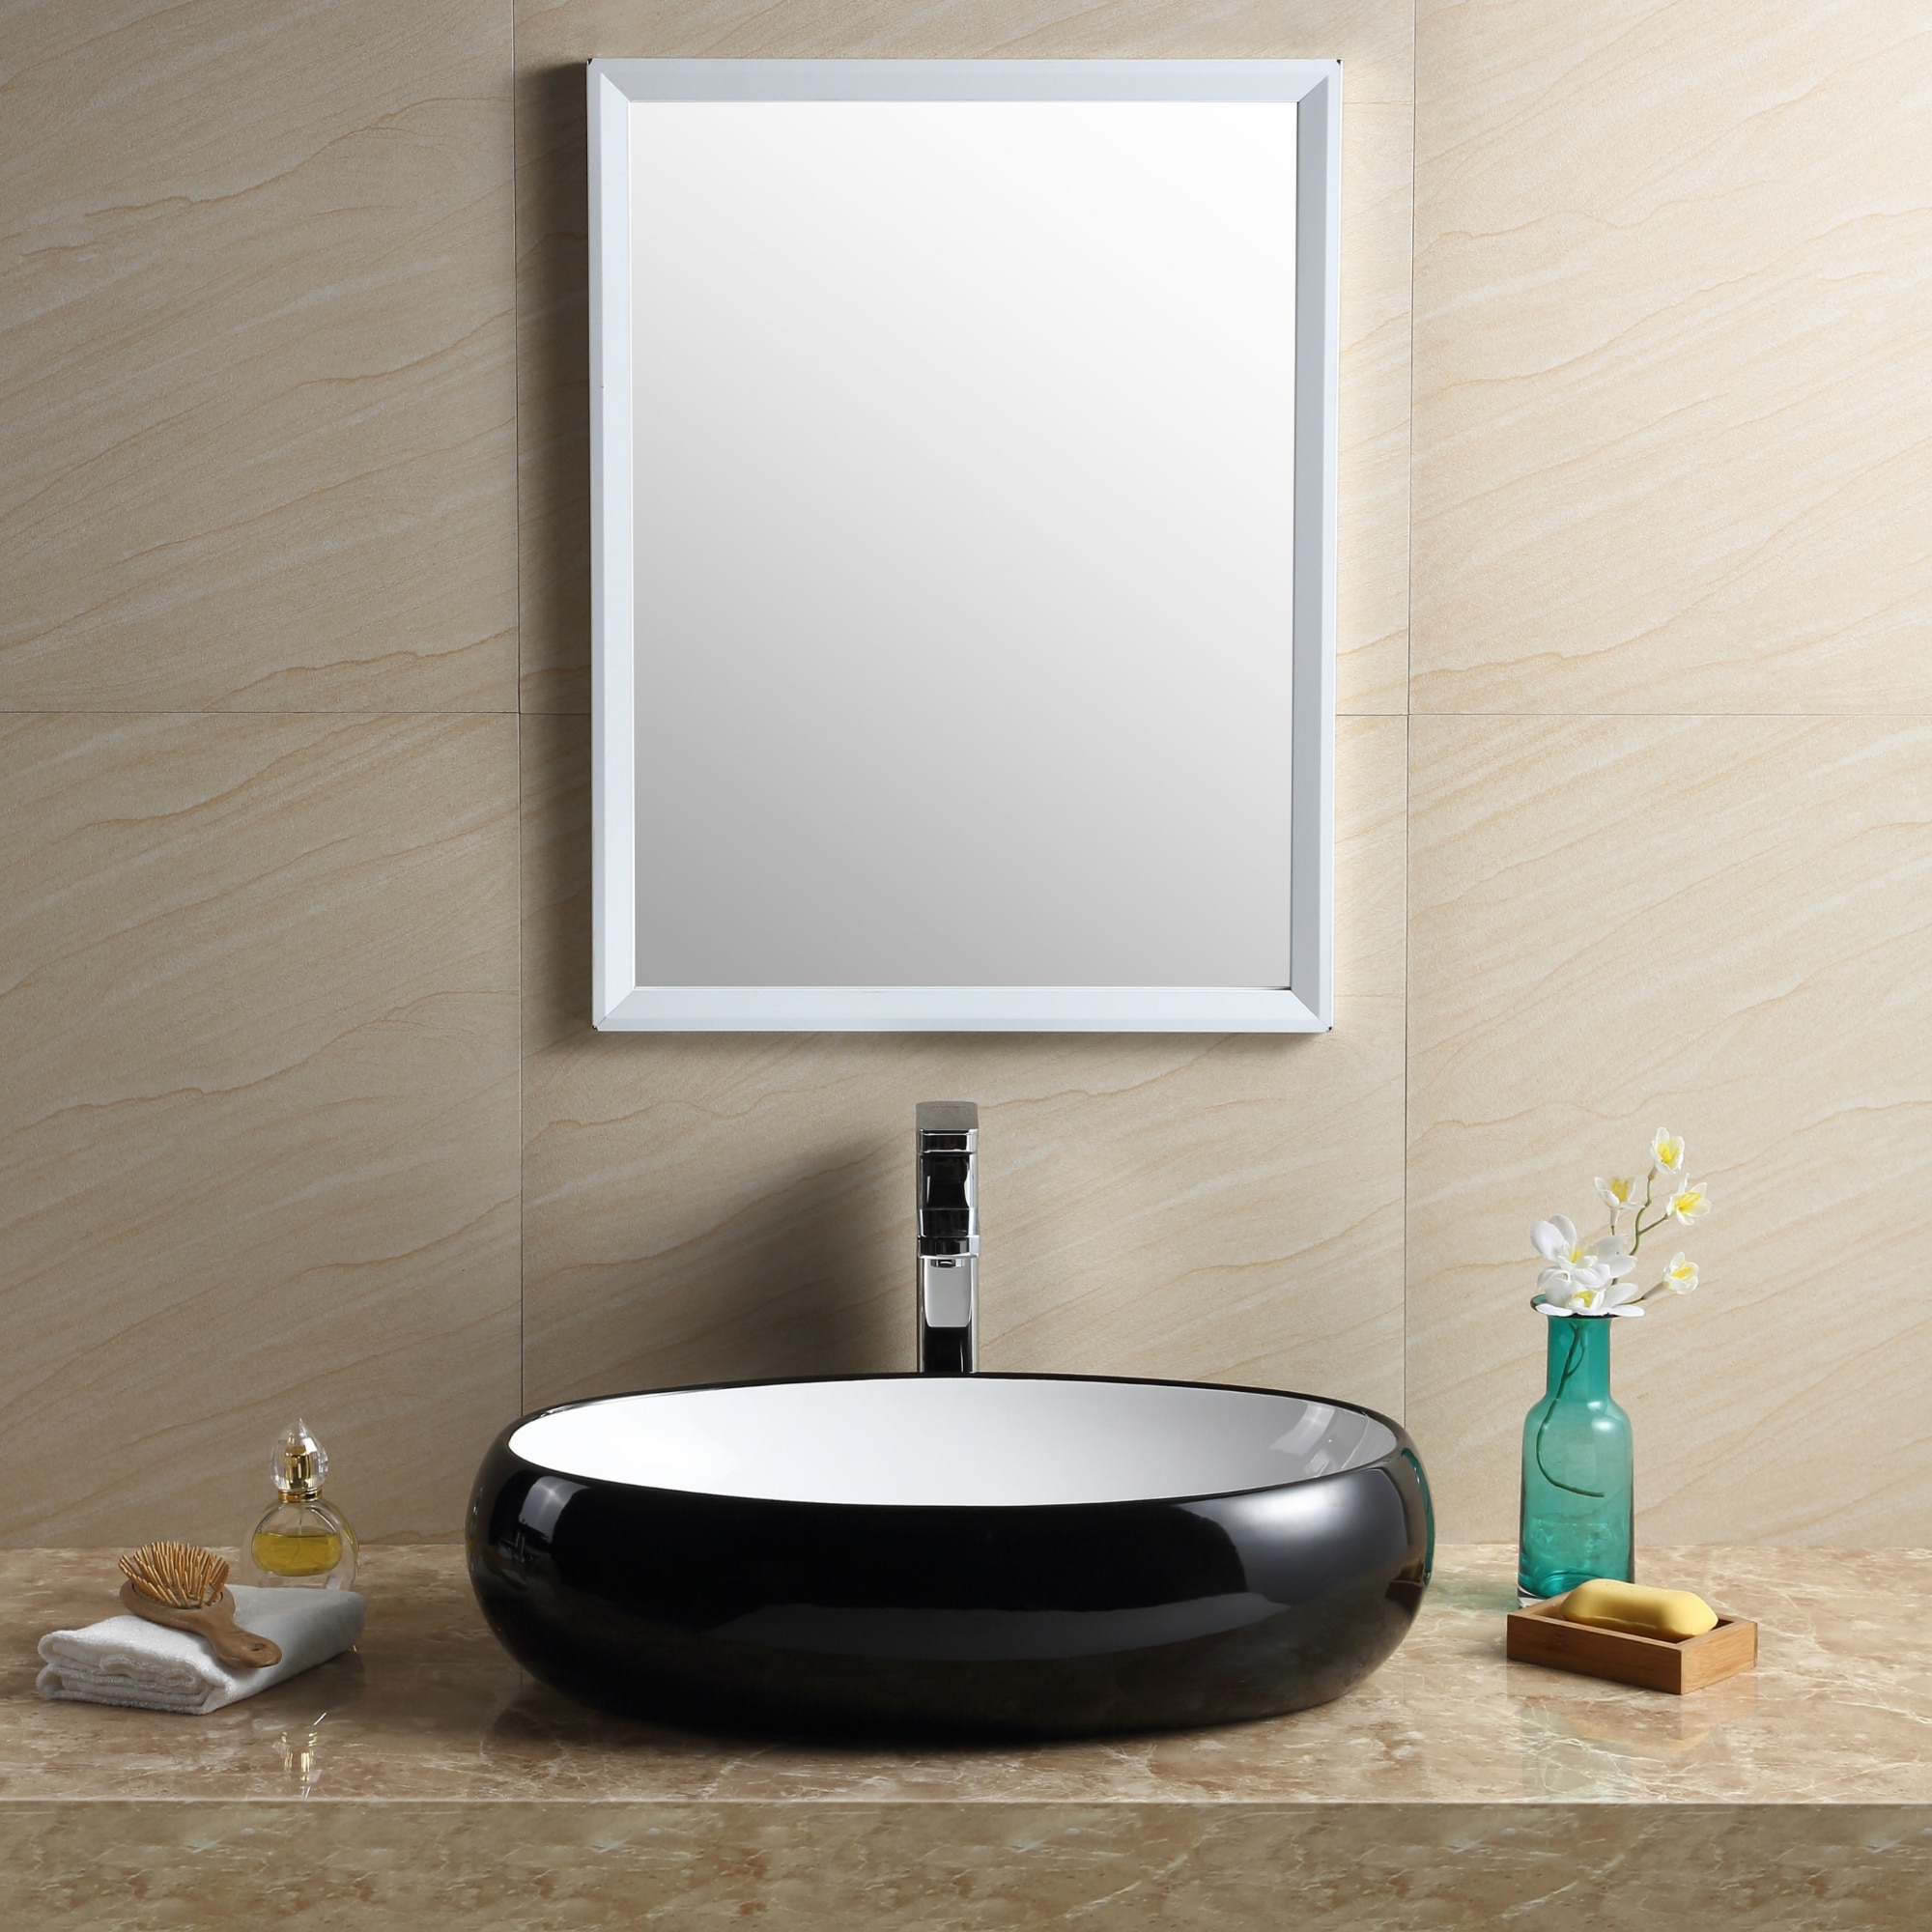 Shop Fine Fixtures Vitreous China Black And White Oval Modern Vessel Bathroom Sink Overstock 12501161